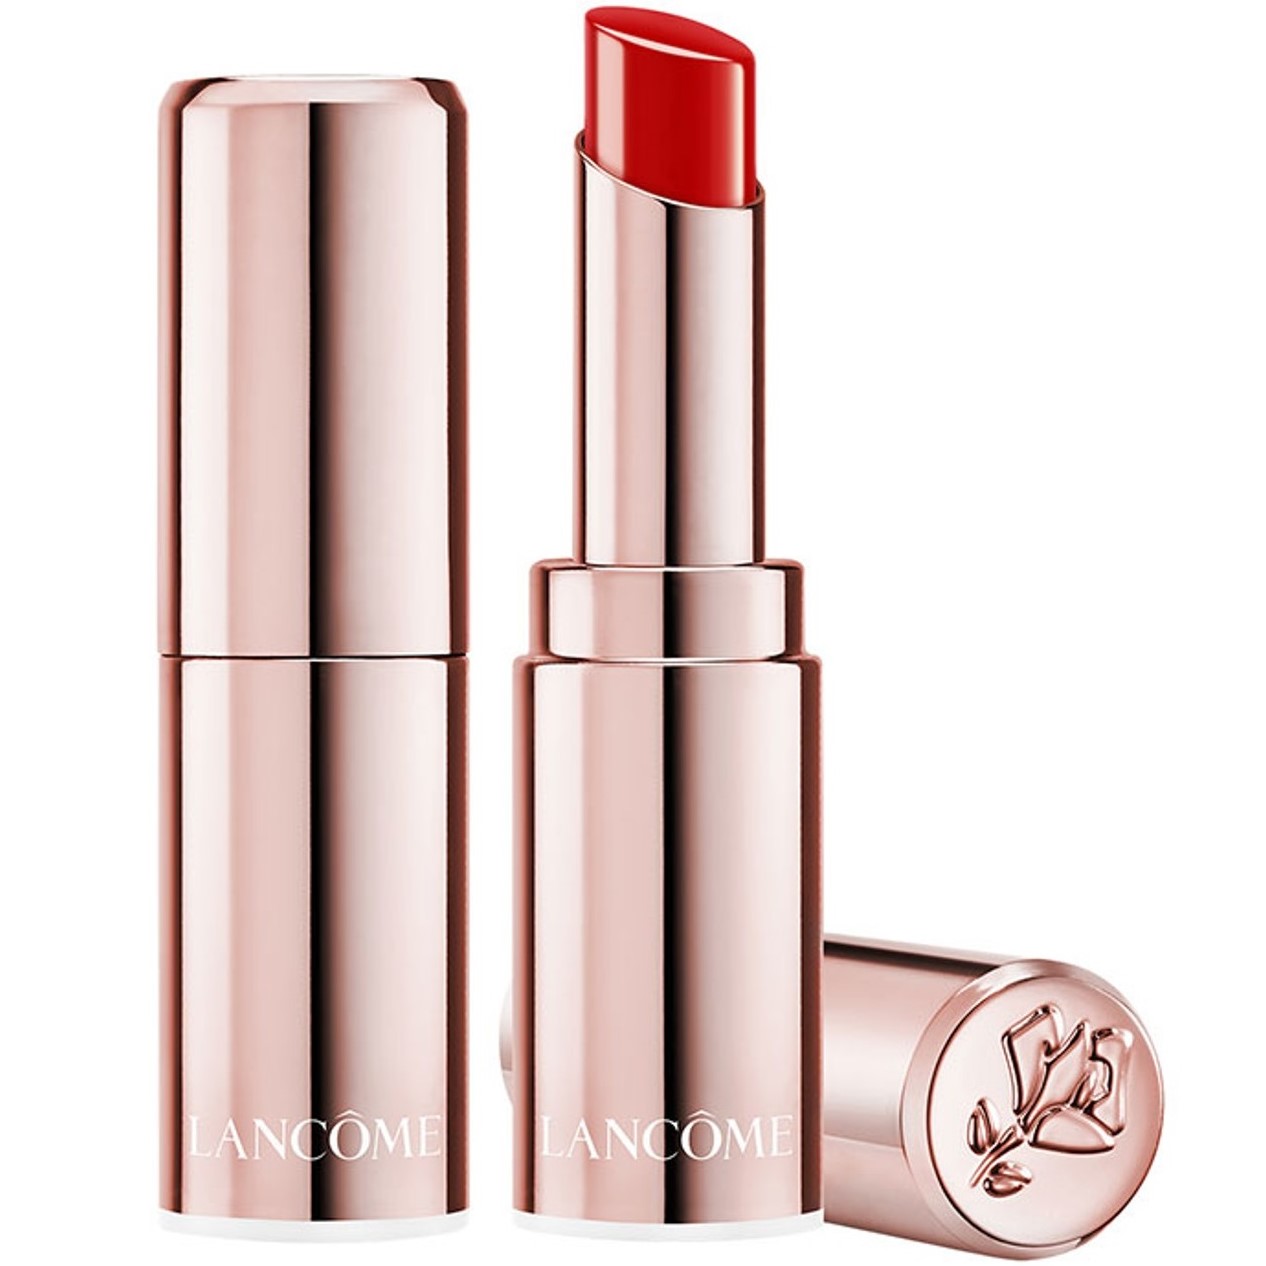 SON LANCOME L ABSOLU MADEMOISELLE SHINE BALMY FEEL LIPSTICK 157 MADEMOISELLE STANDS OUT MÀU ĐỎ 4